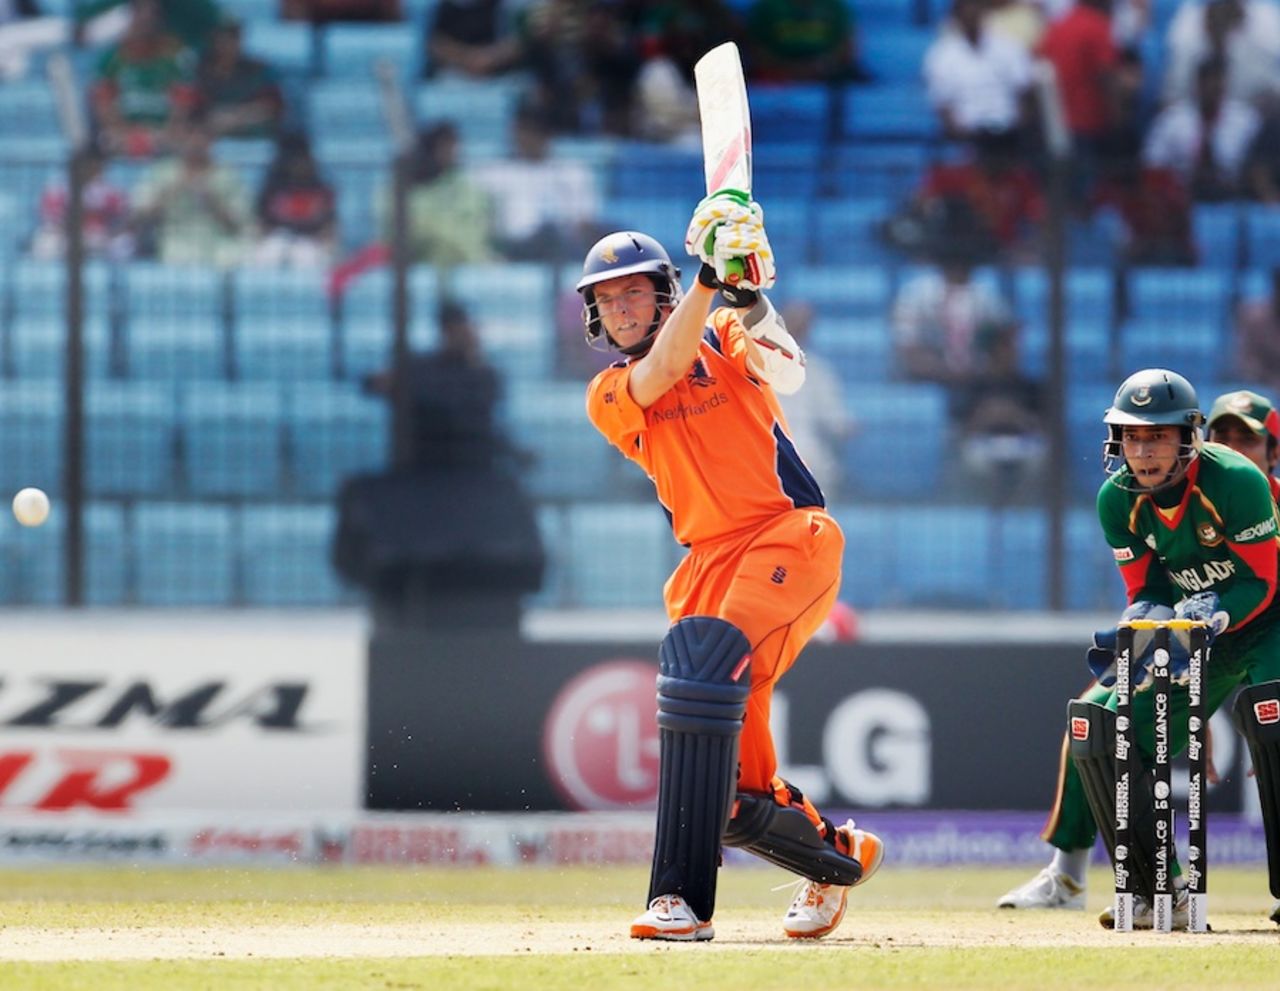 Eric Szwarczynski scored 28 before he was run out, Bangladesh v Netherlands, Group B, World Cup 2011, Chittagong, March 14, 2011